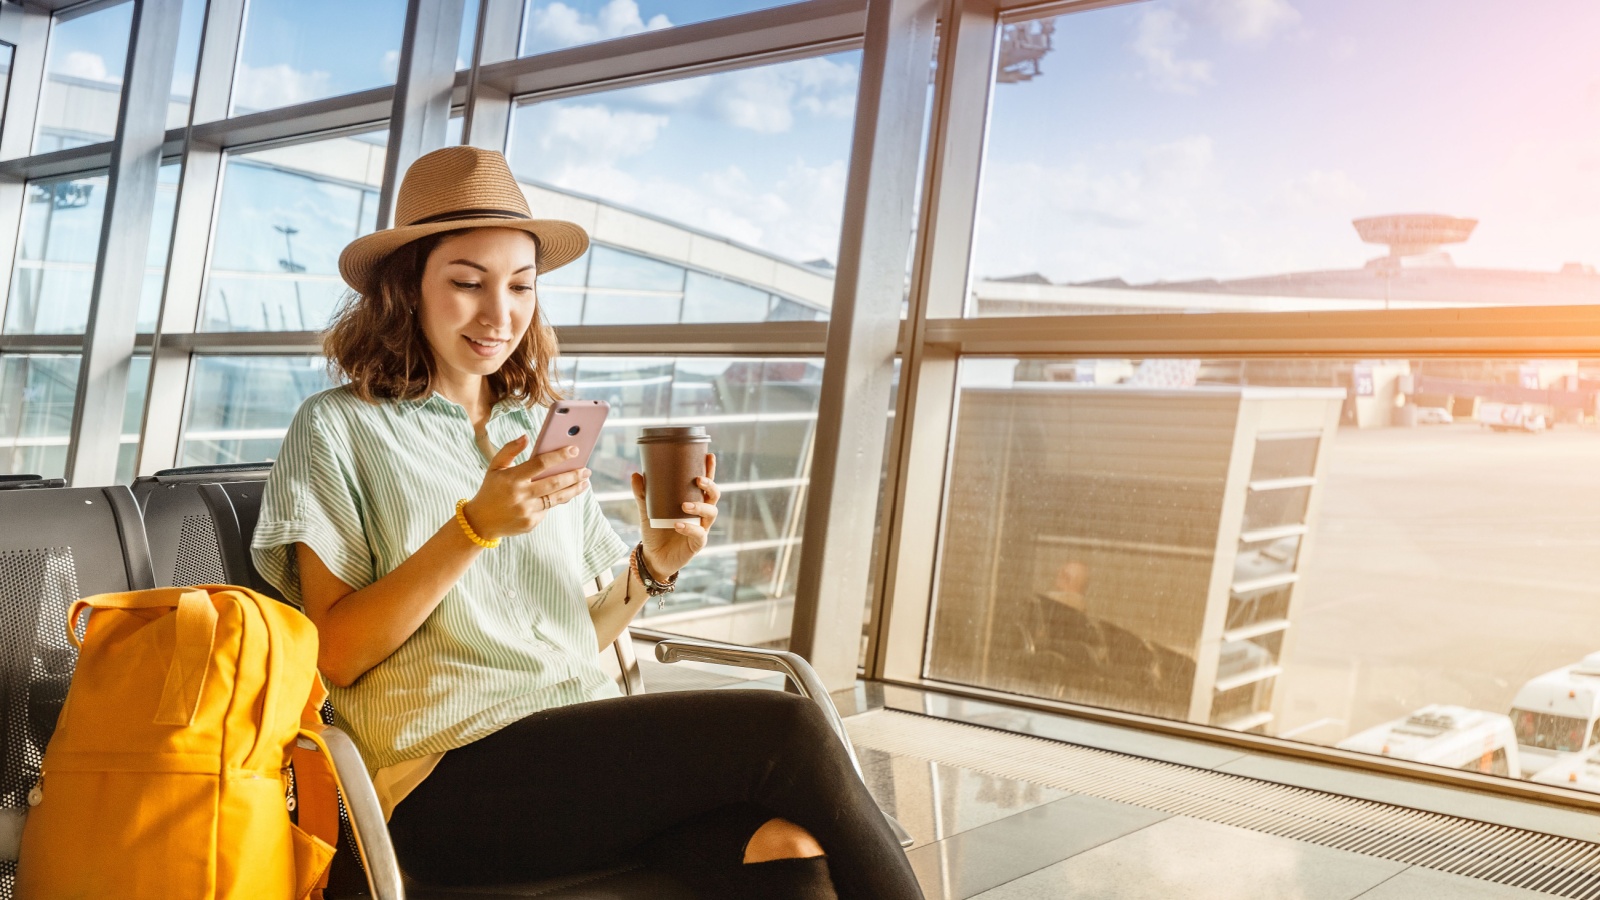 Asian girl waiting for departure at the airport on your vacation. Uses a smartphone and drinks coffee